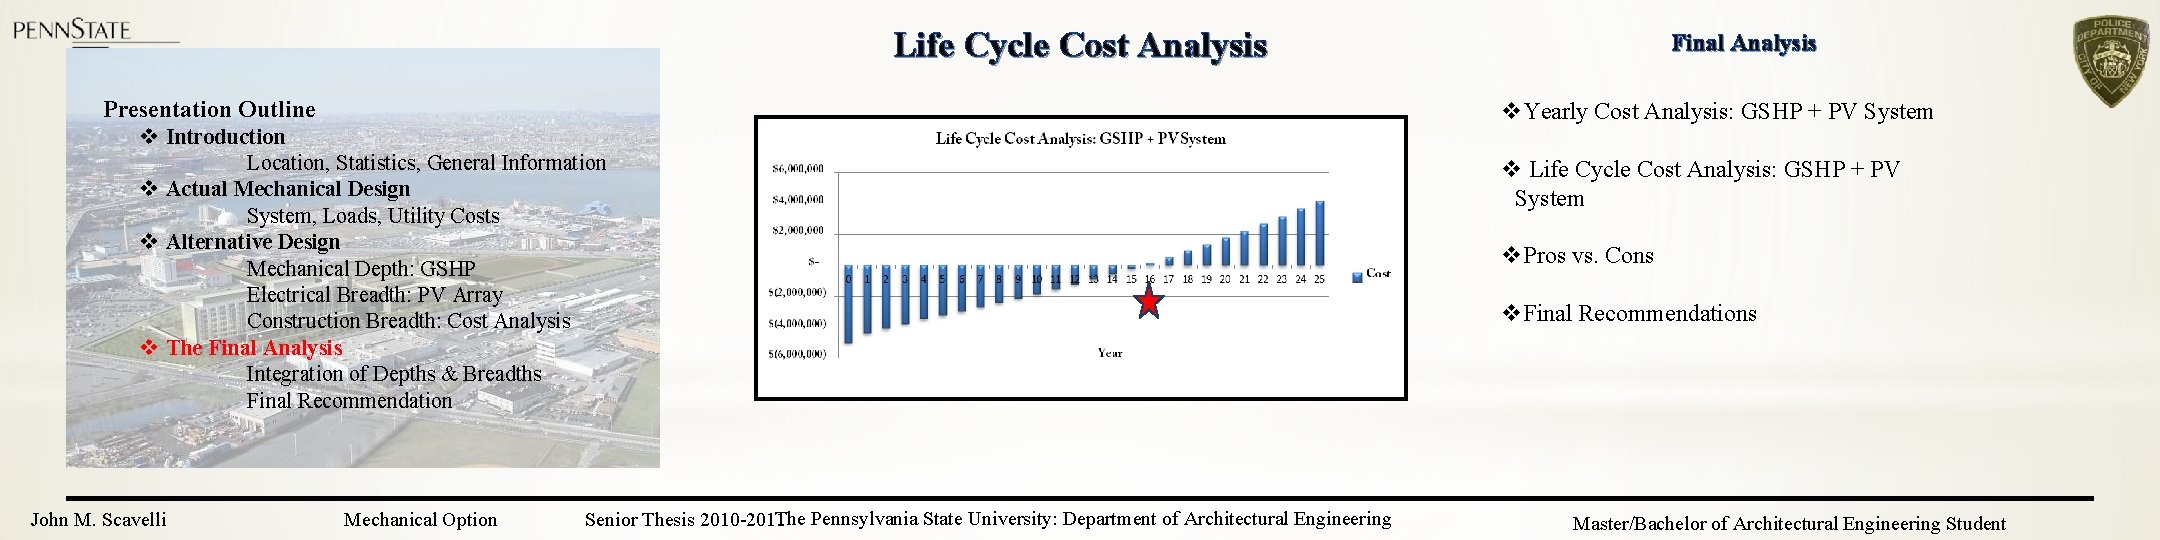 Life Cycle Cost Analysis Presentation Outline v Introduction Location, Statistics, General Information v Actual